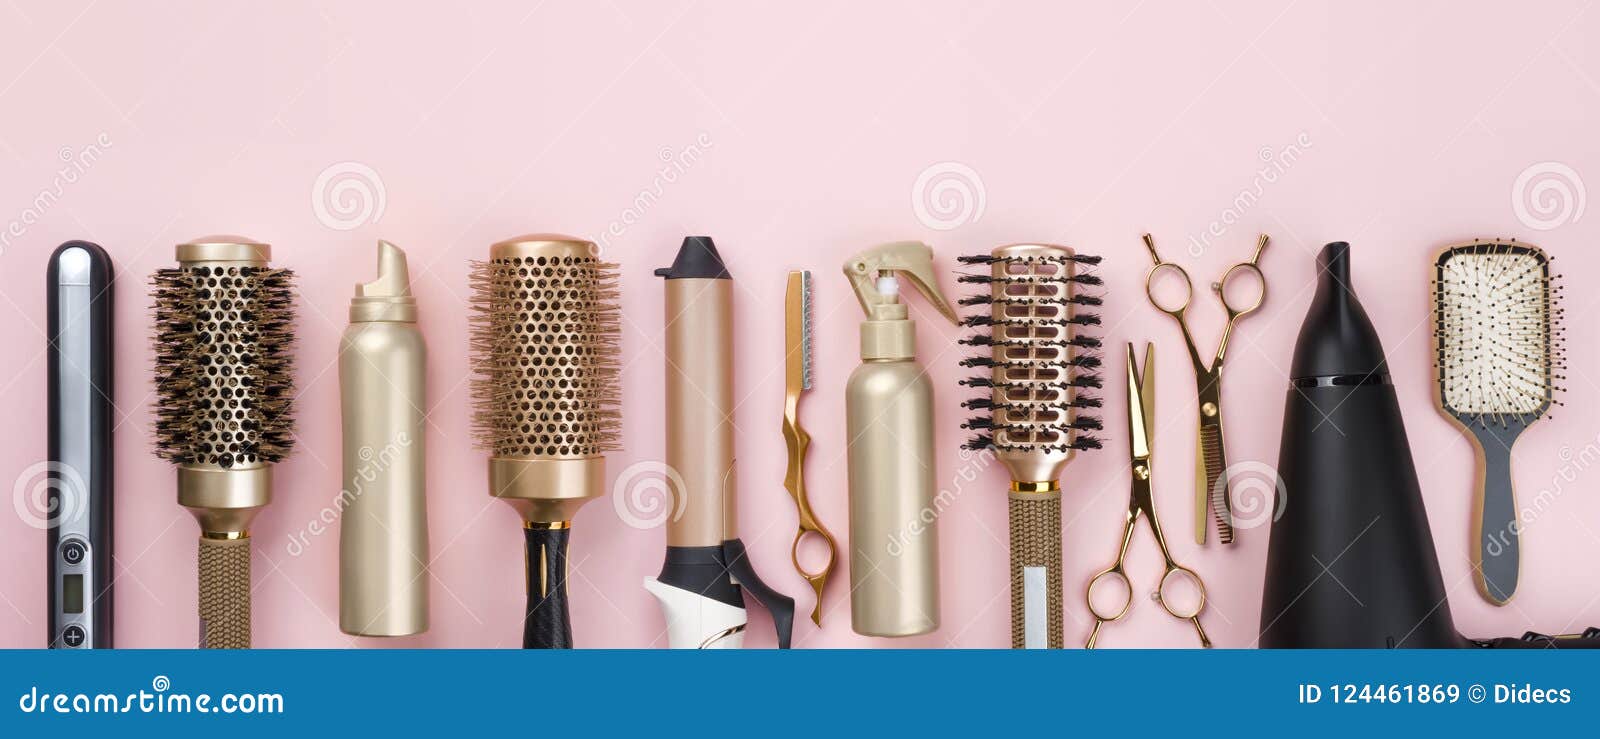 Professional Hair Dresser Tools On Pink Background With Copy Space